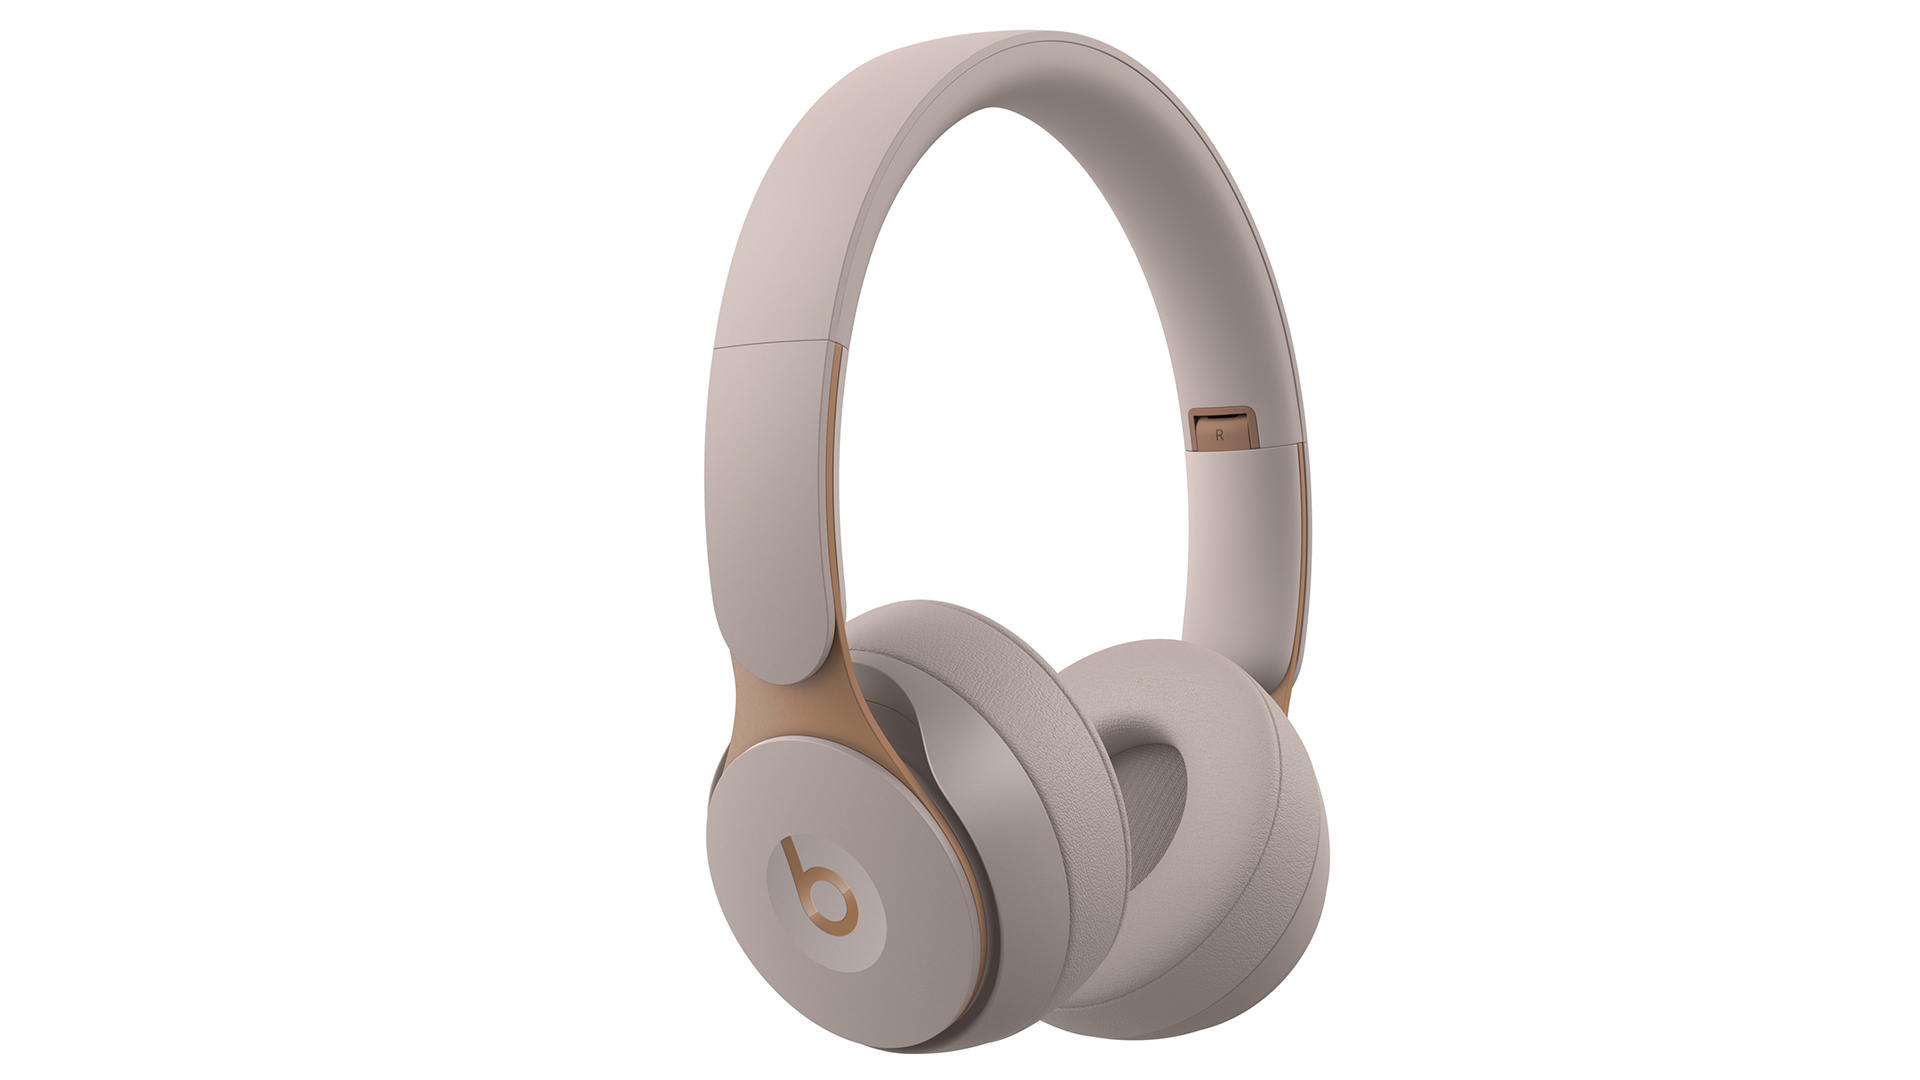 Beats discontinues several products including Powerbeats, Solo Pro